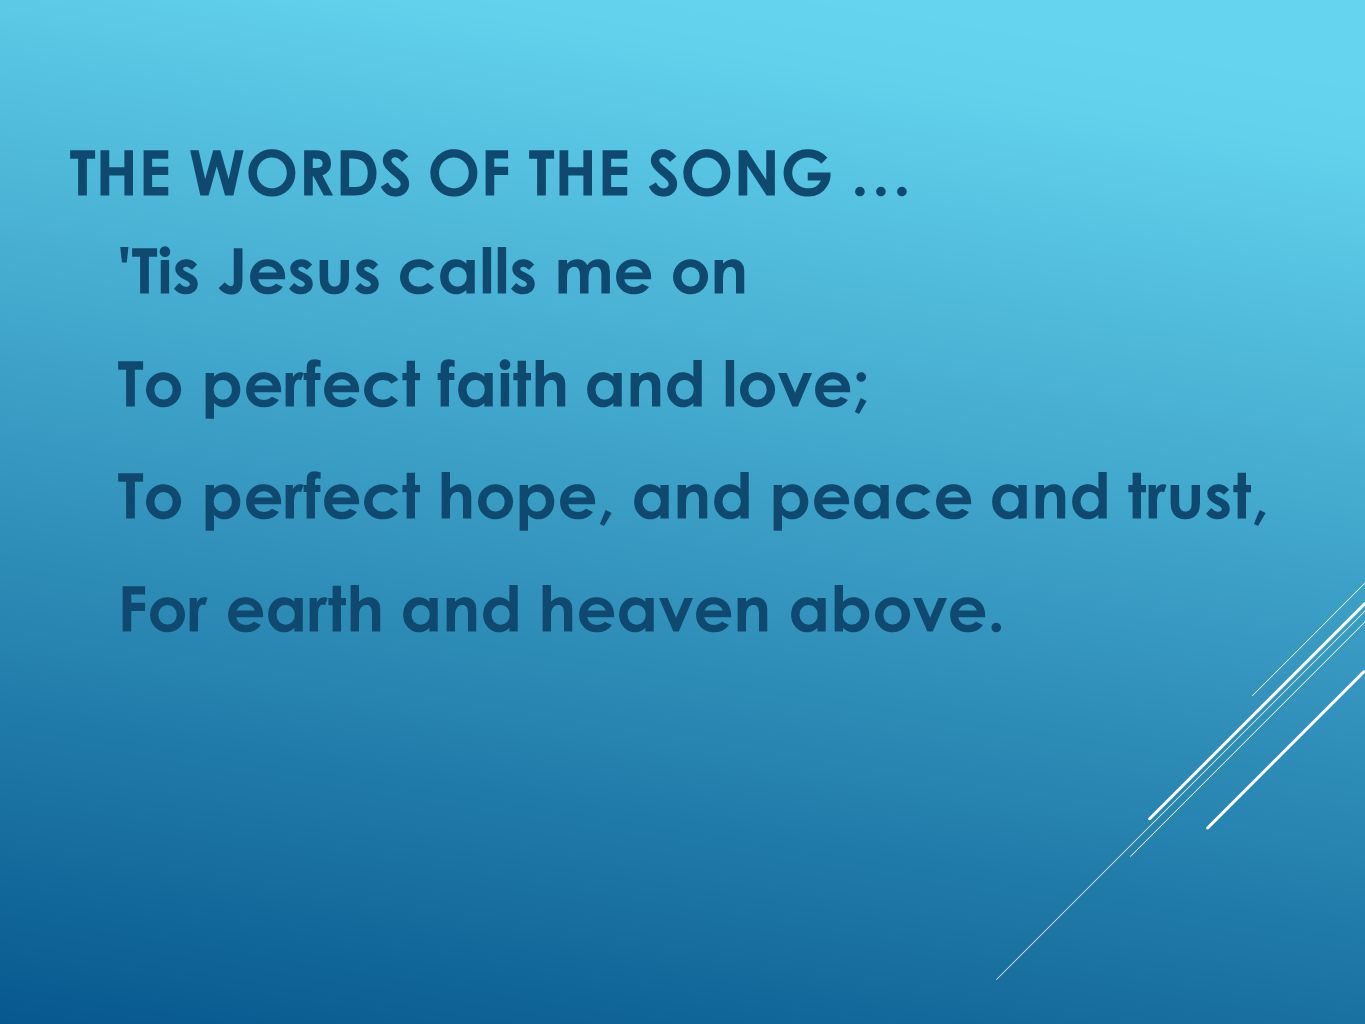 THE WORDS OF THE SONG … Tis Jesus calls me on To perfect faith and love; To perfect hope, and peace and trust, For earth and heaven above.